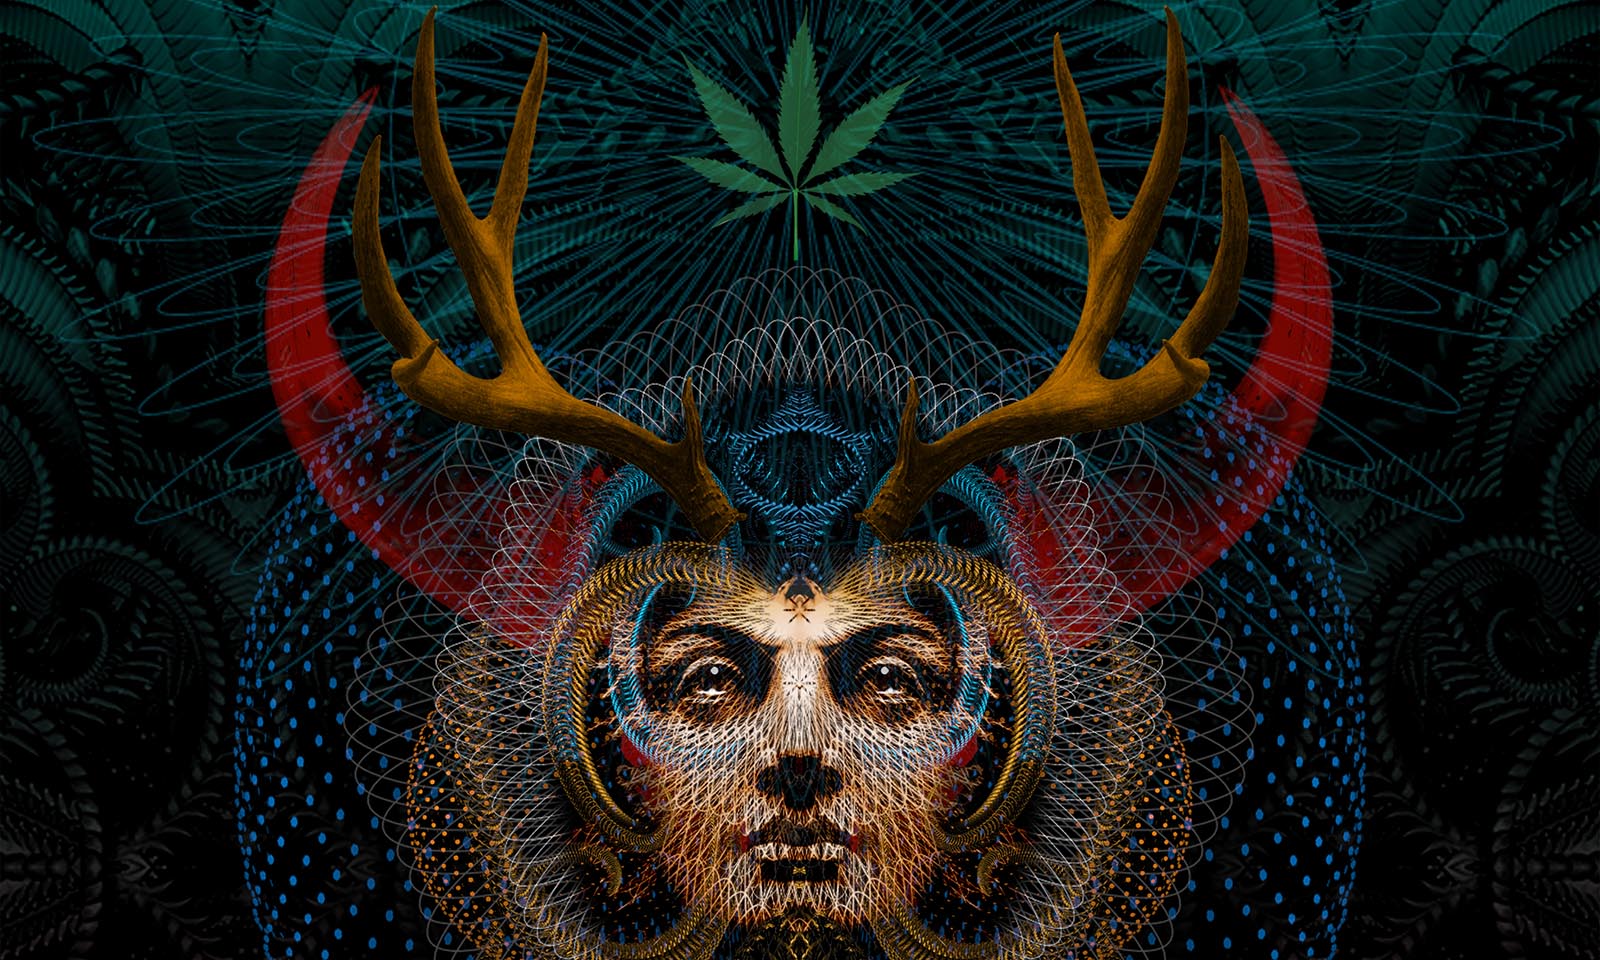 Detailed artwork created by an artist under the influence of cannabis